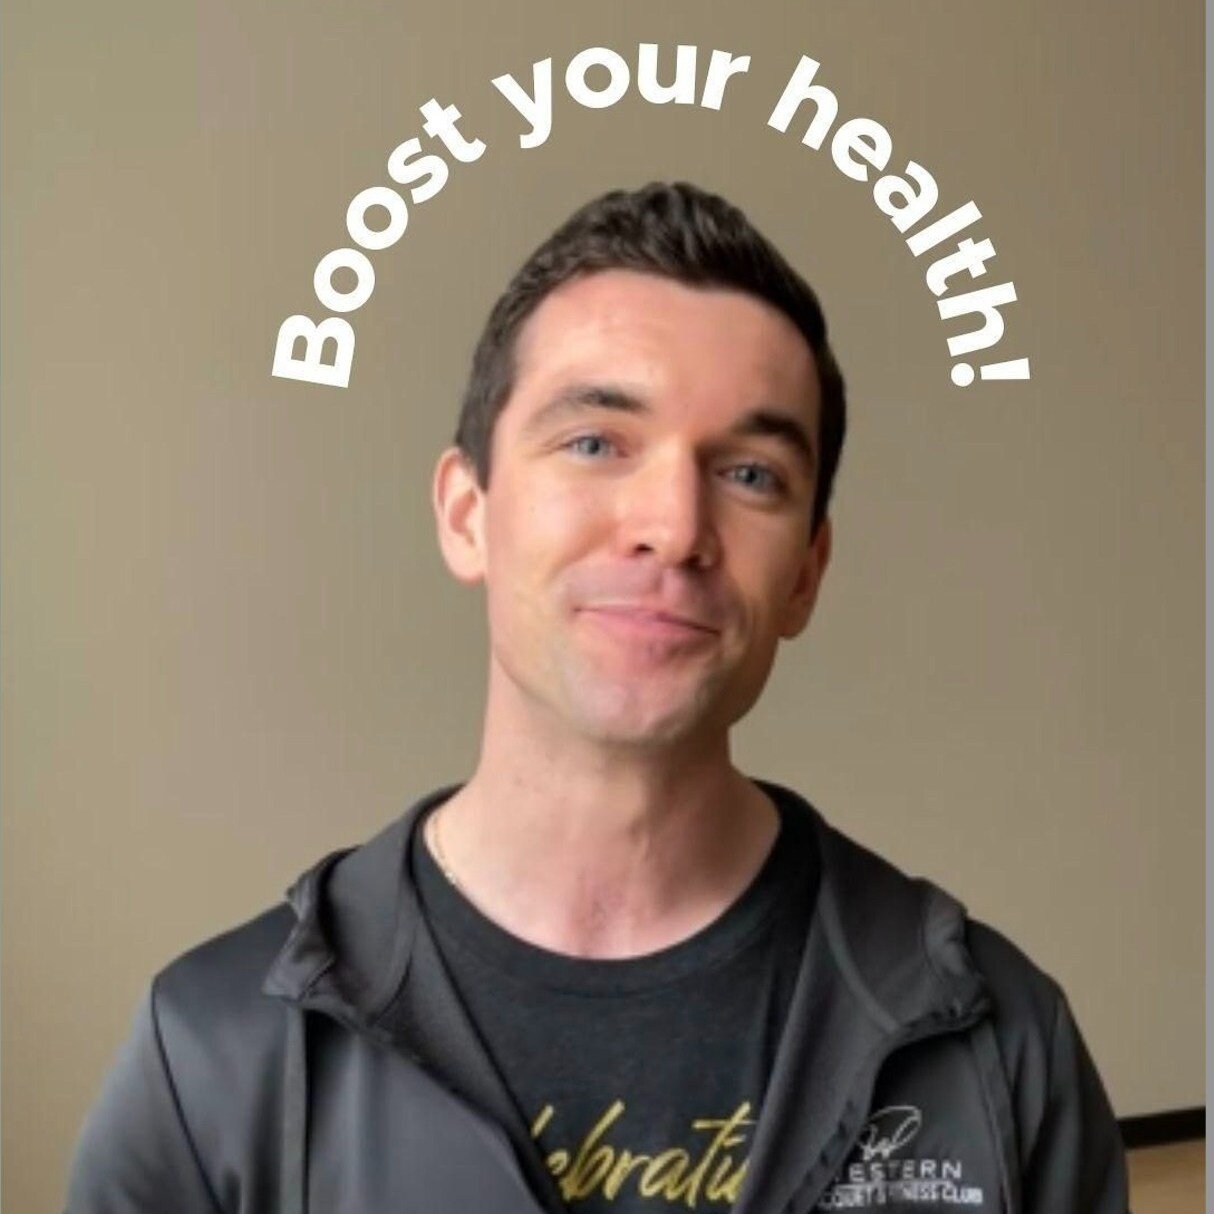 Want some simple yet effective strategies to boost your physical and mental health?

Join us for an empowering health &amp; wellness journey led by Ryan Doro, one of Western's personal trainers.

🗓️ Mark your calendars: Second Tuesday &amp; Fourth S